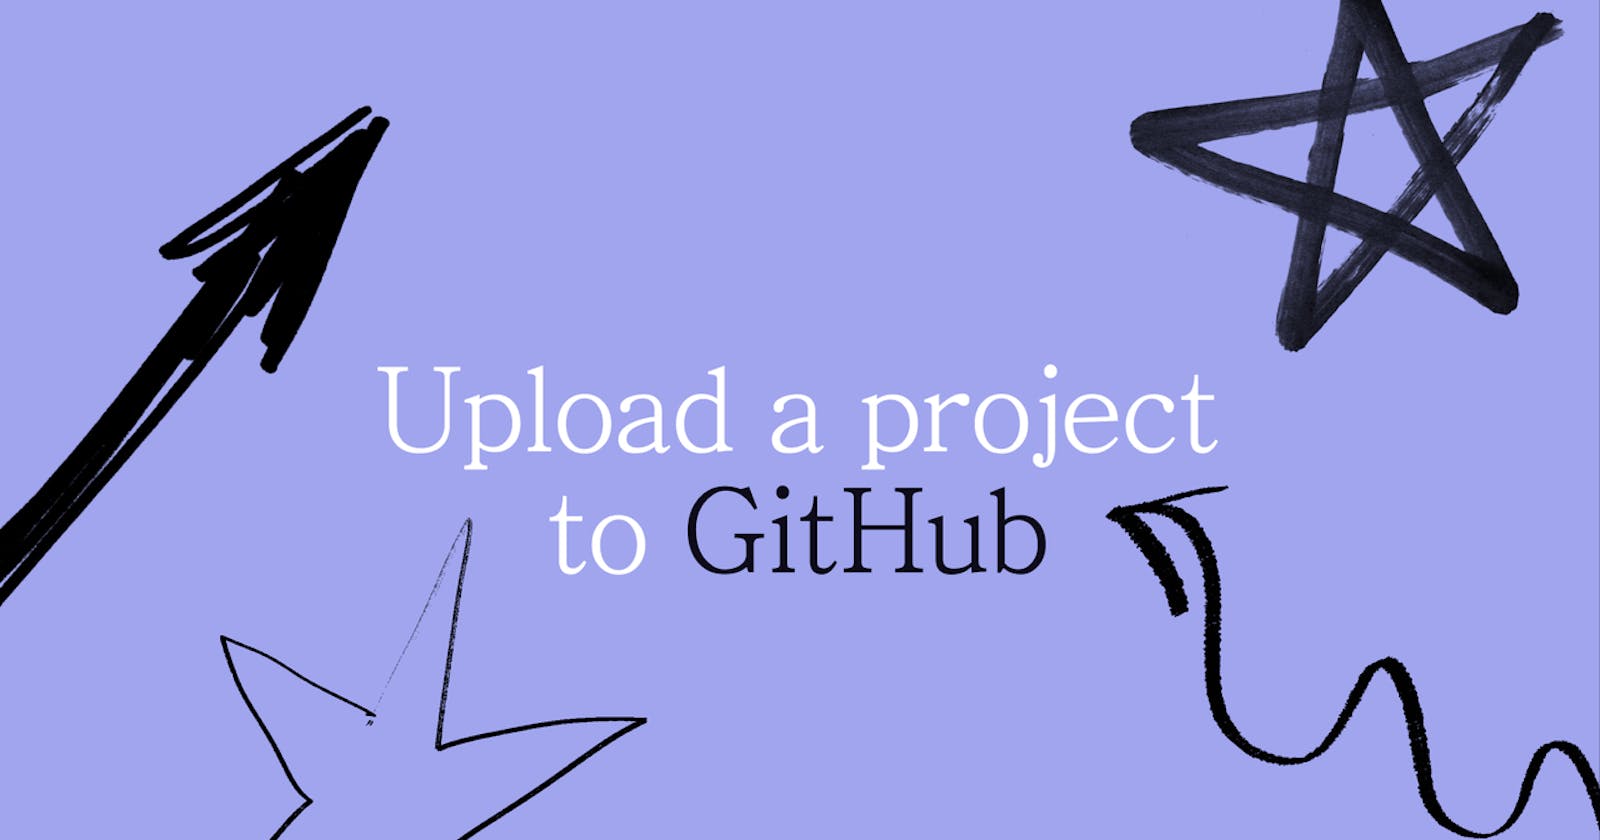 Uploading a project to GitHub ⬆️